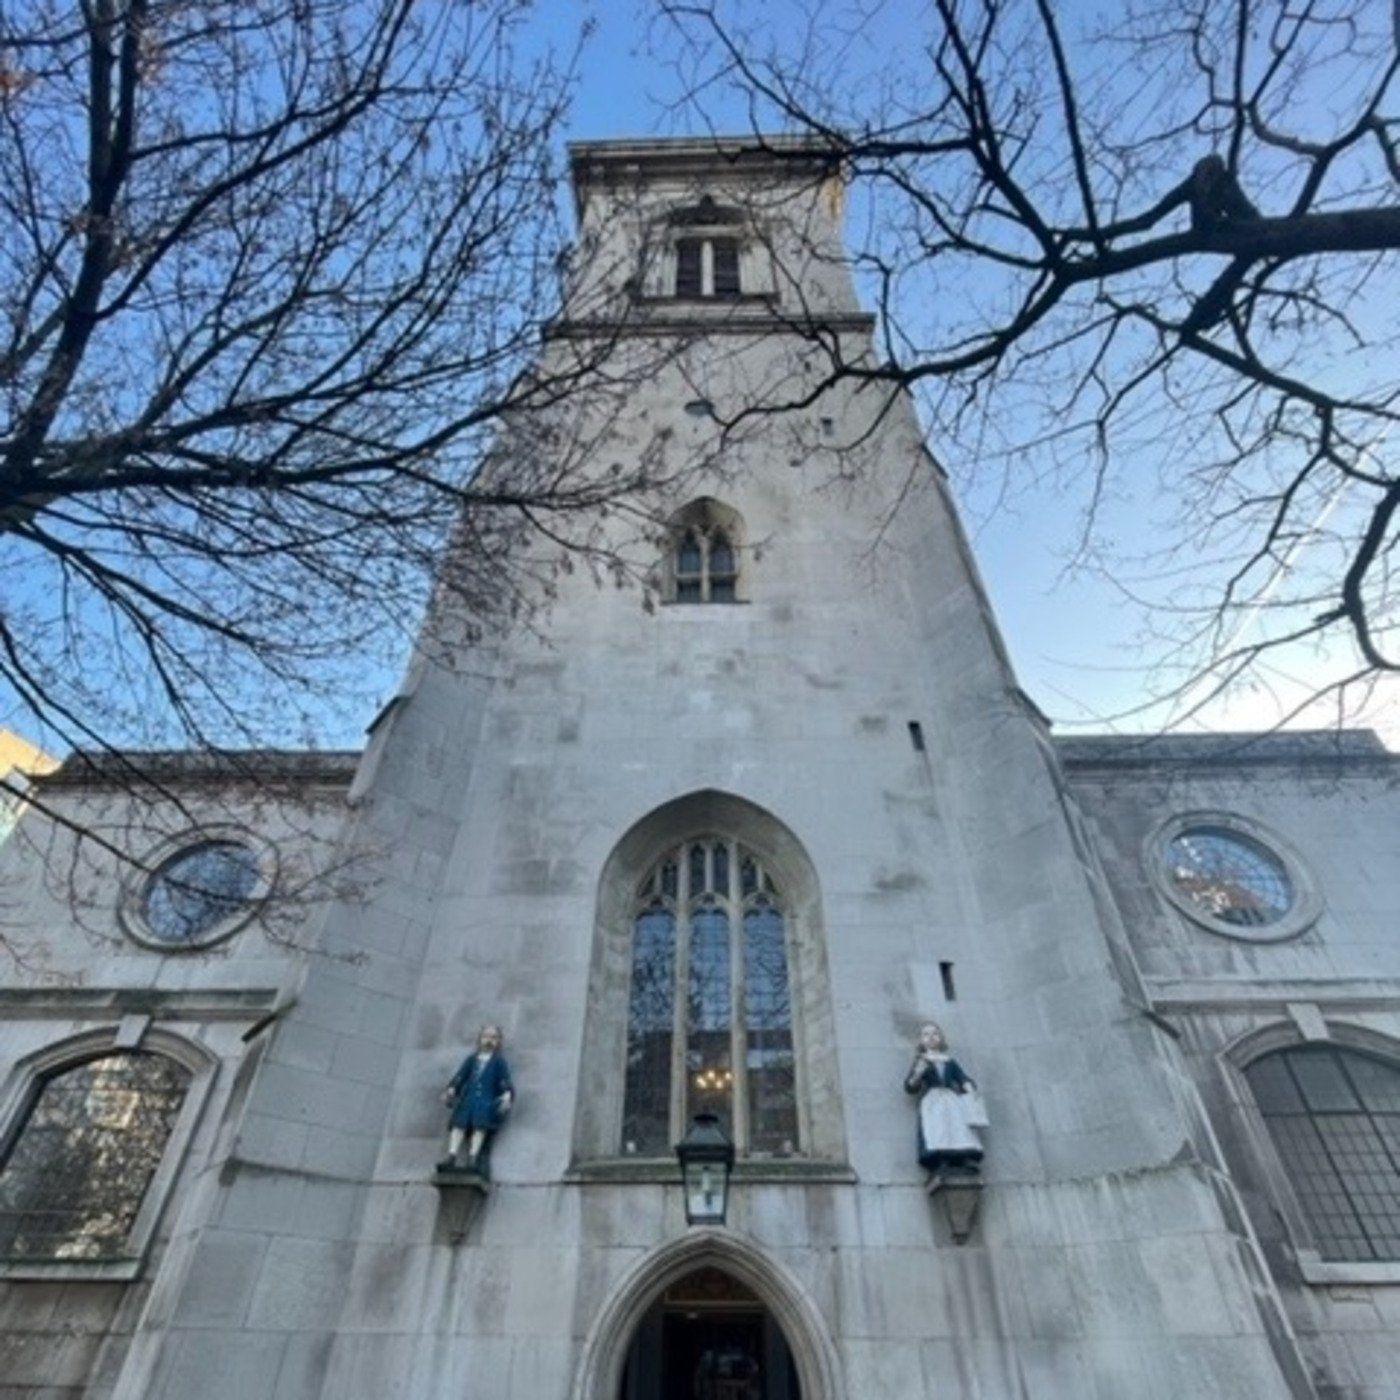 Episode 38: City of London Churches - St Andrew Holborn